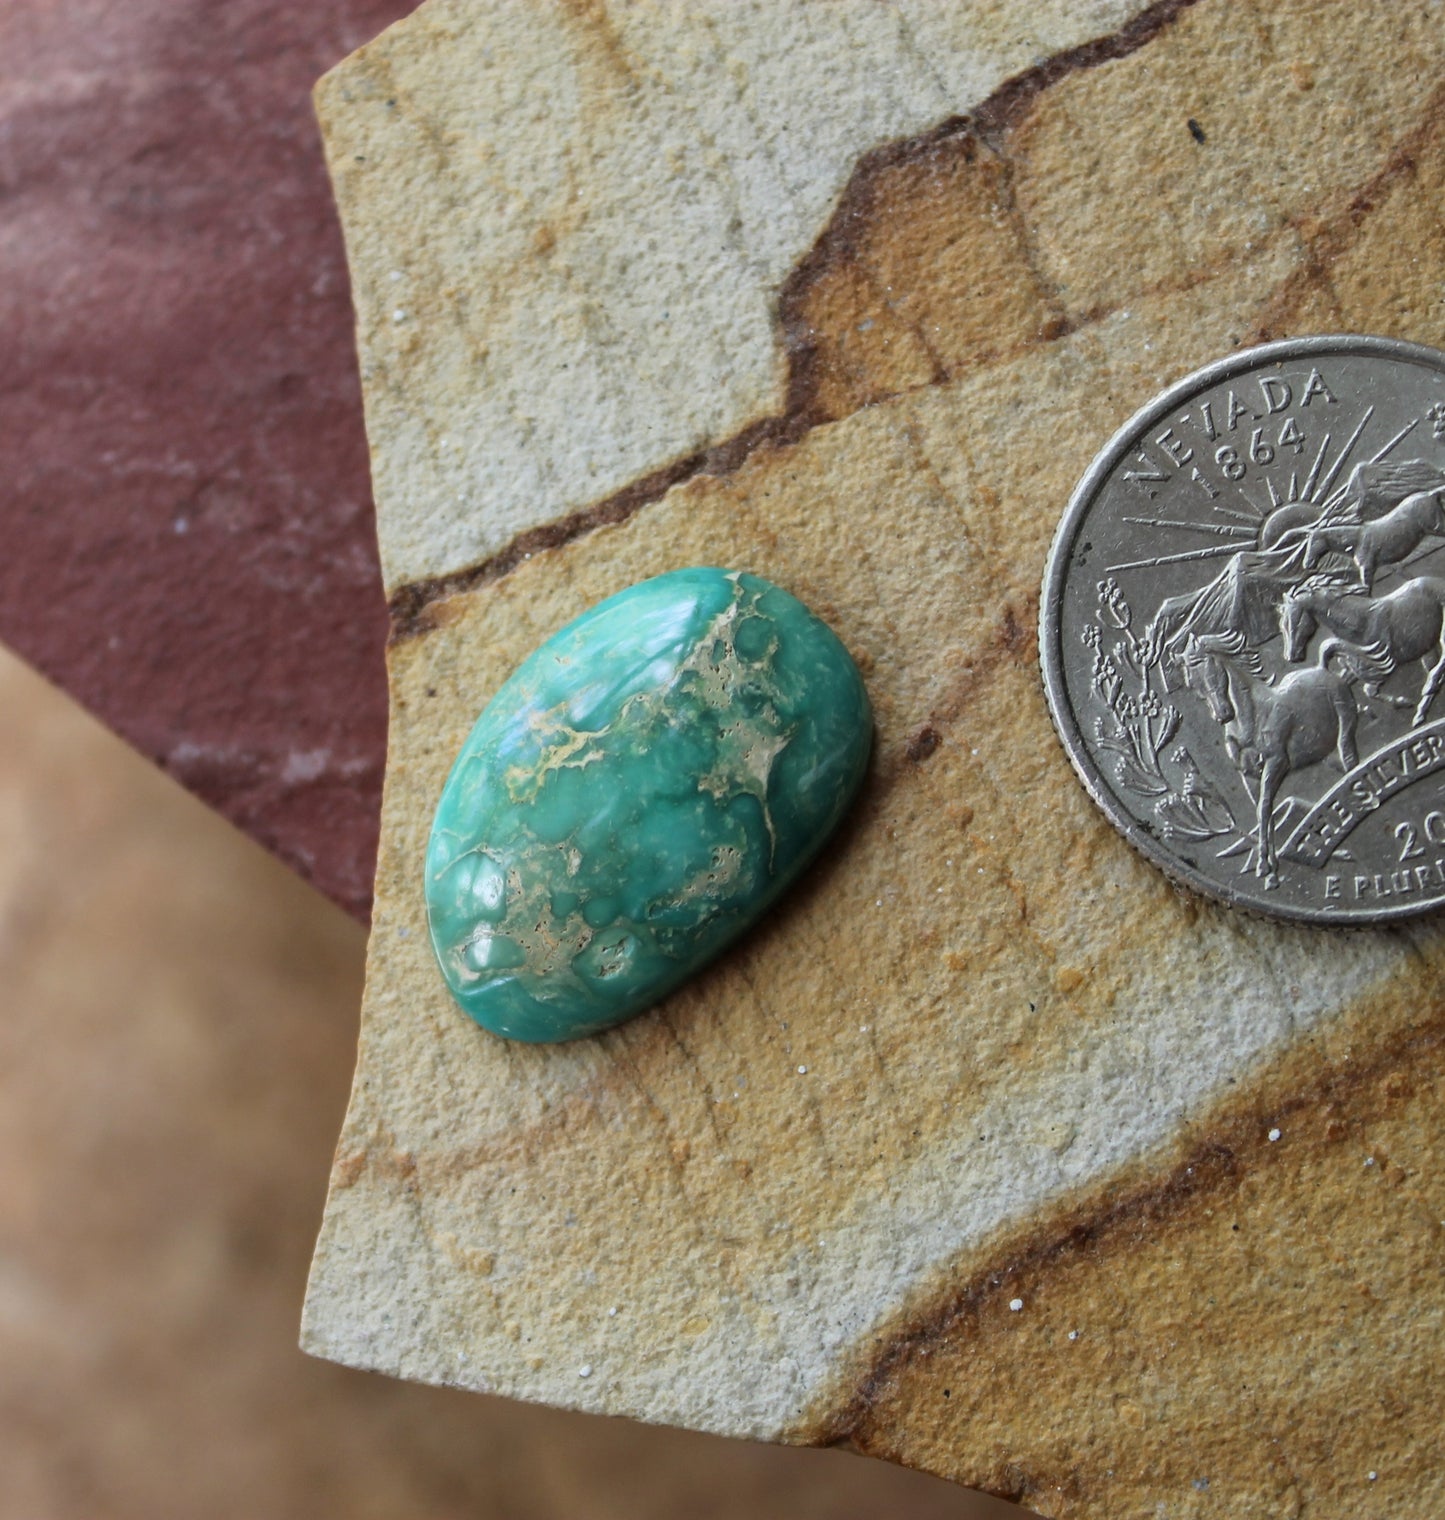 9 carat green Stone Mountain Turquoise cabochon